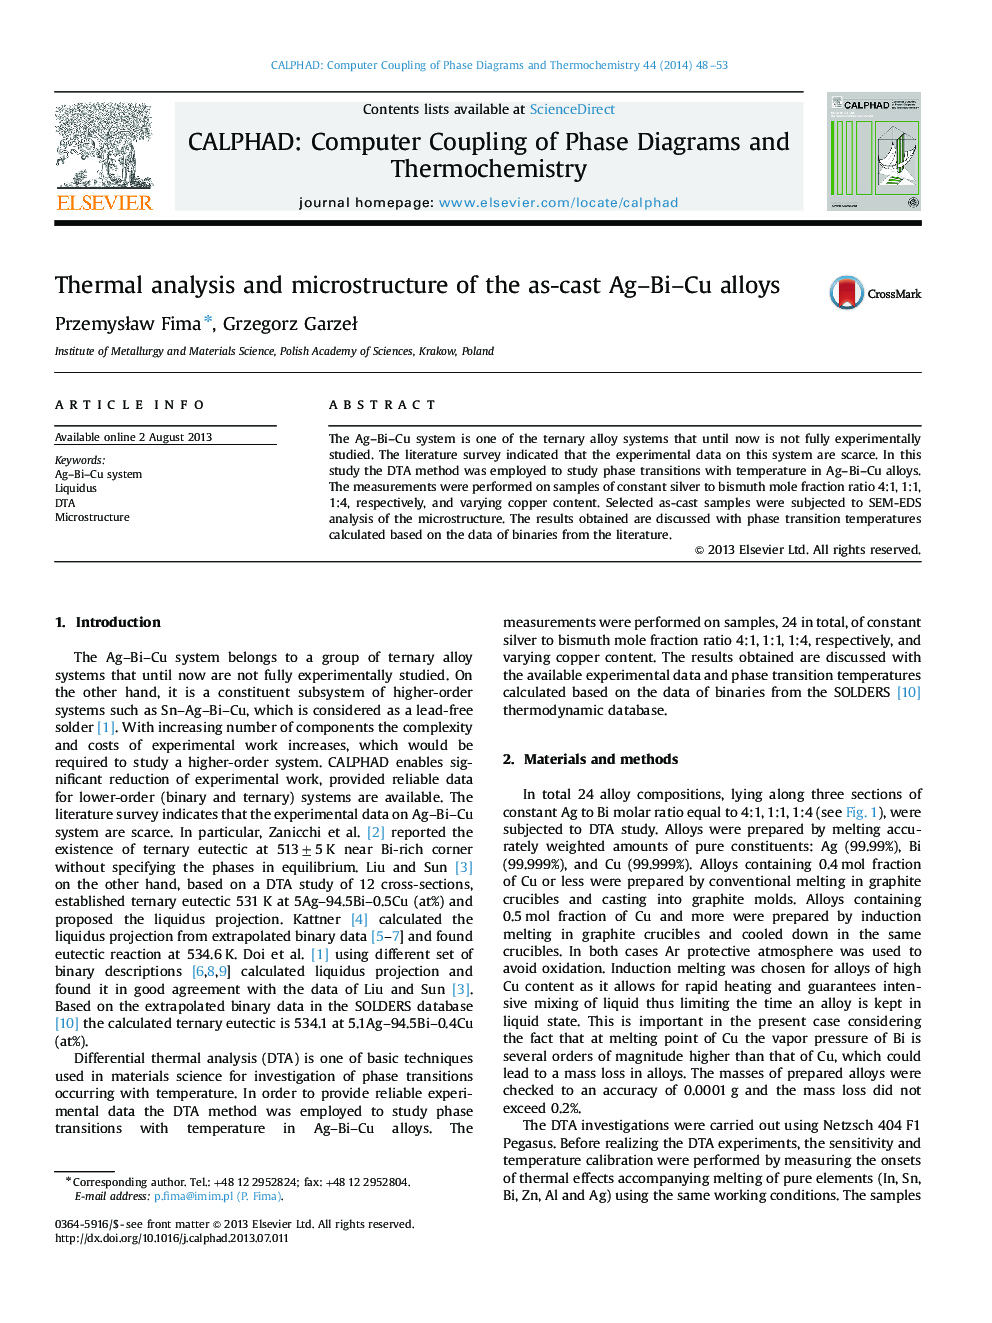 Thermal analysis and microstructure of the as-cast Ag-Bi-Cu alloys